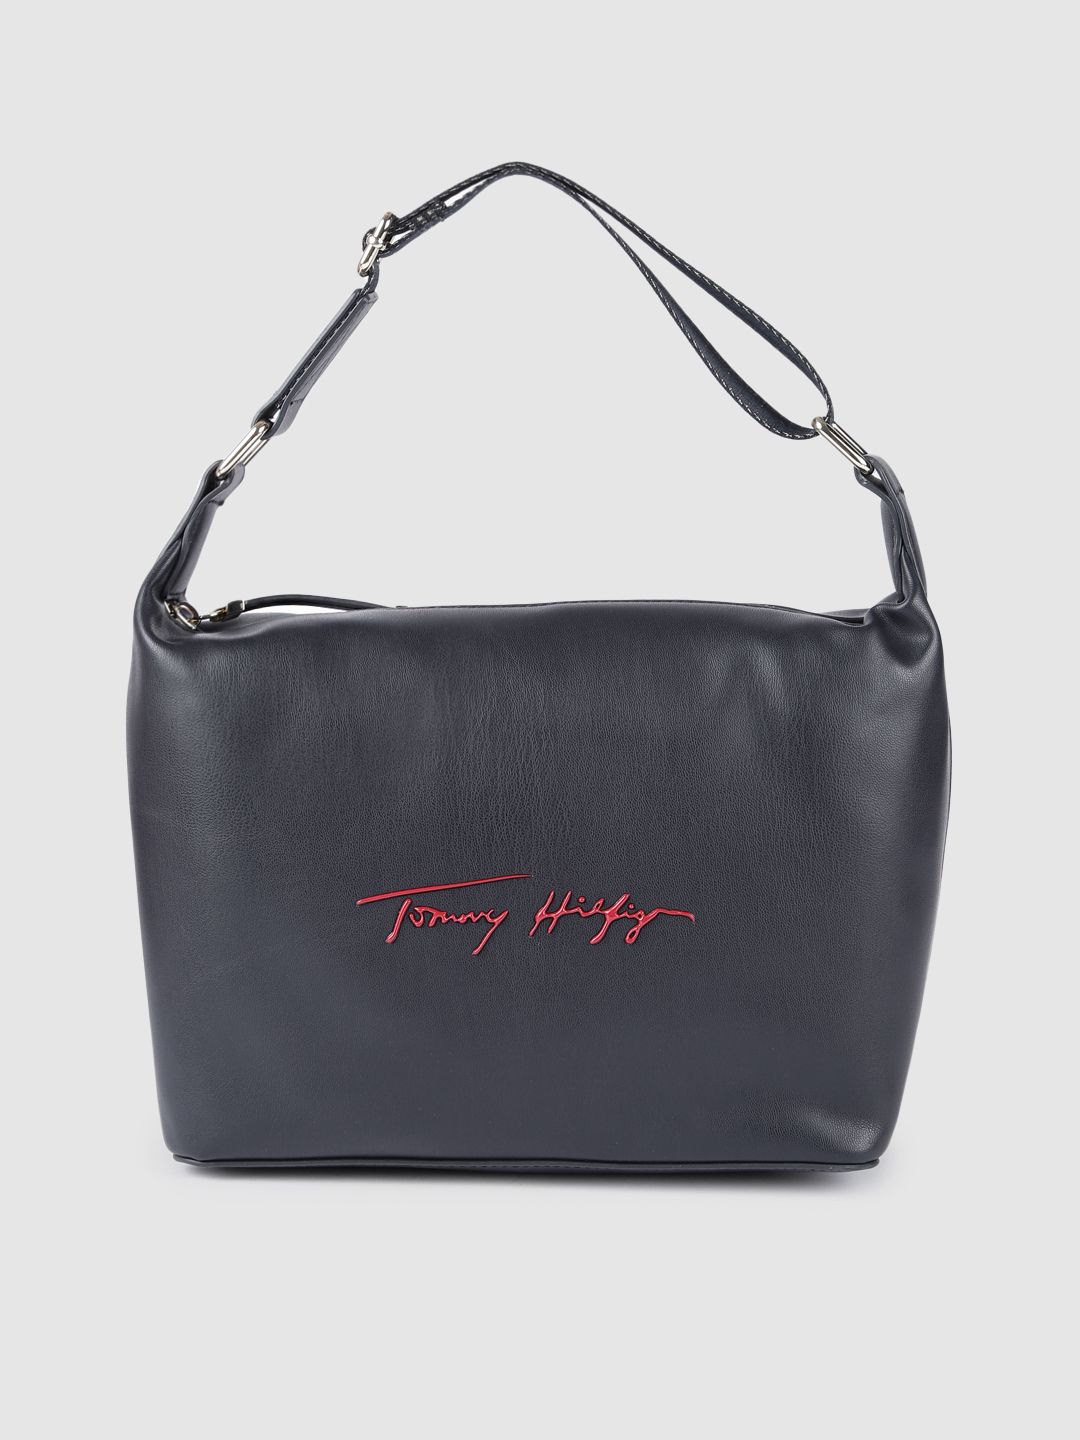 Tommy Hilfiger Navy Blue Solid Structured Handheld Bag Price in India